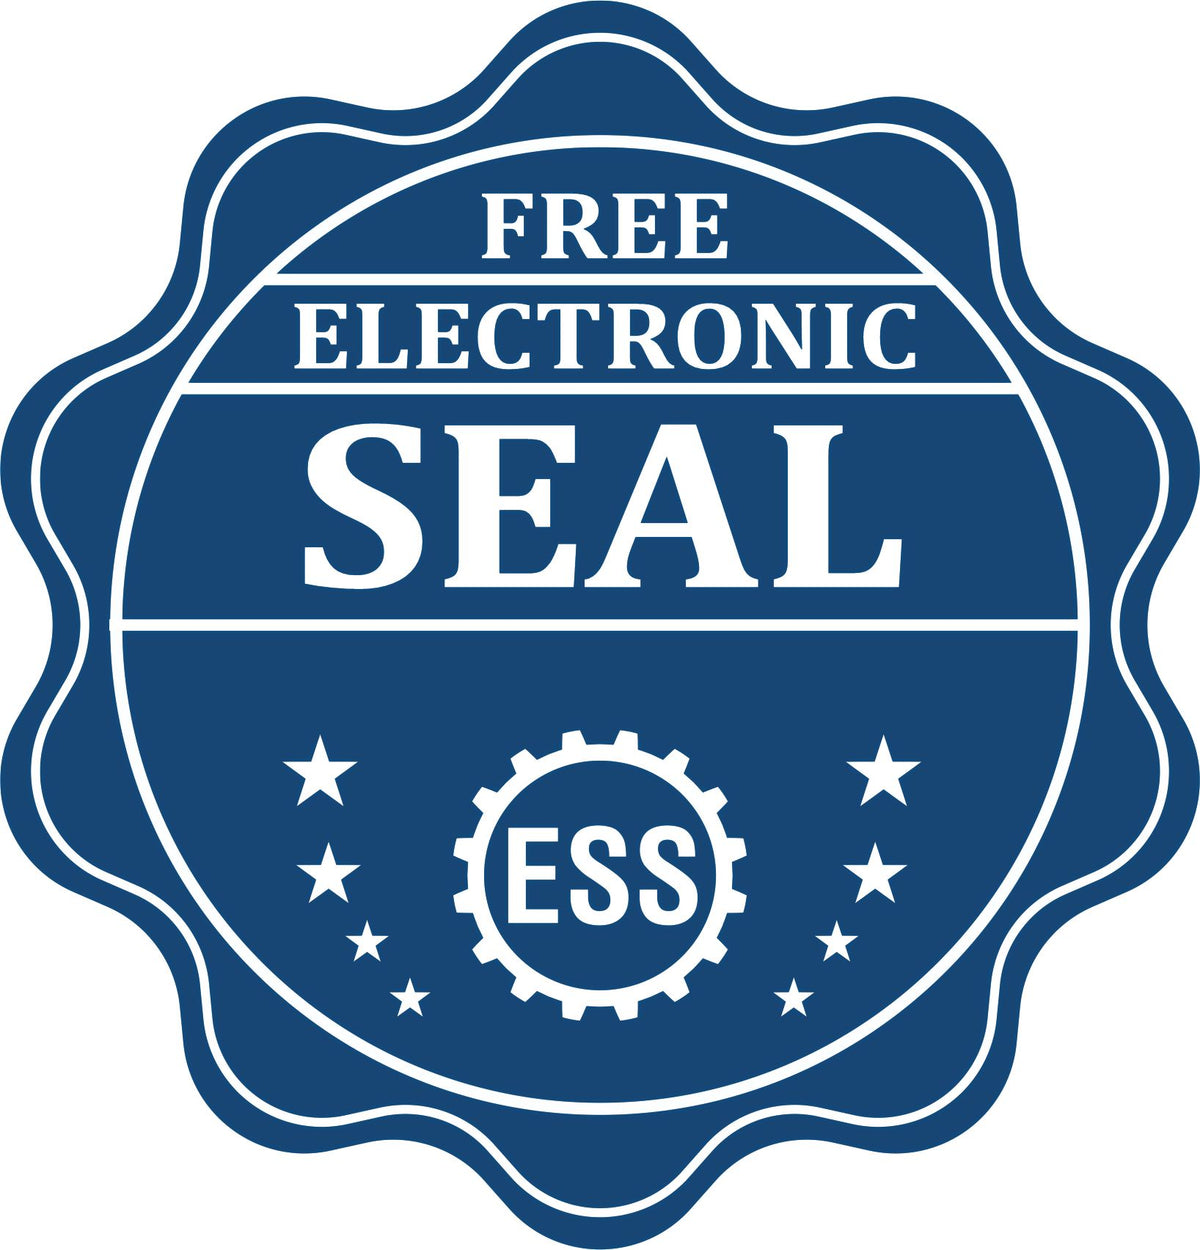 A badge showing a free electronic seal for the Louisiana Desk Architect Embossing Seal with stars and the ESS gear on the emblem.